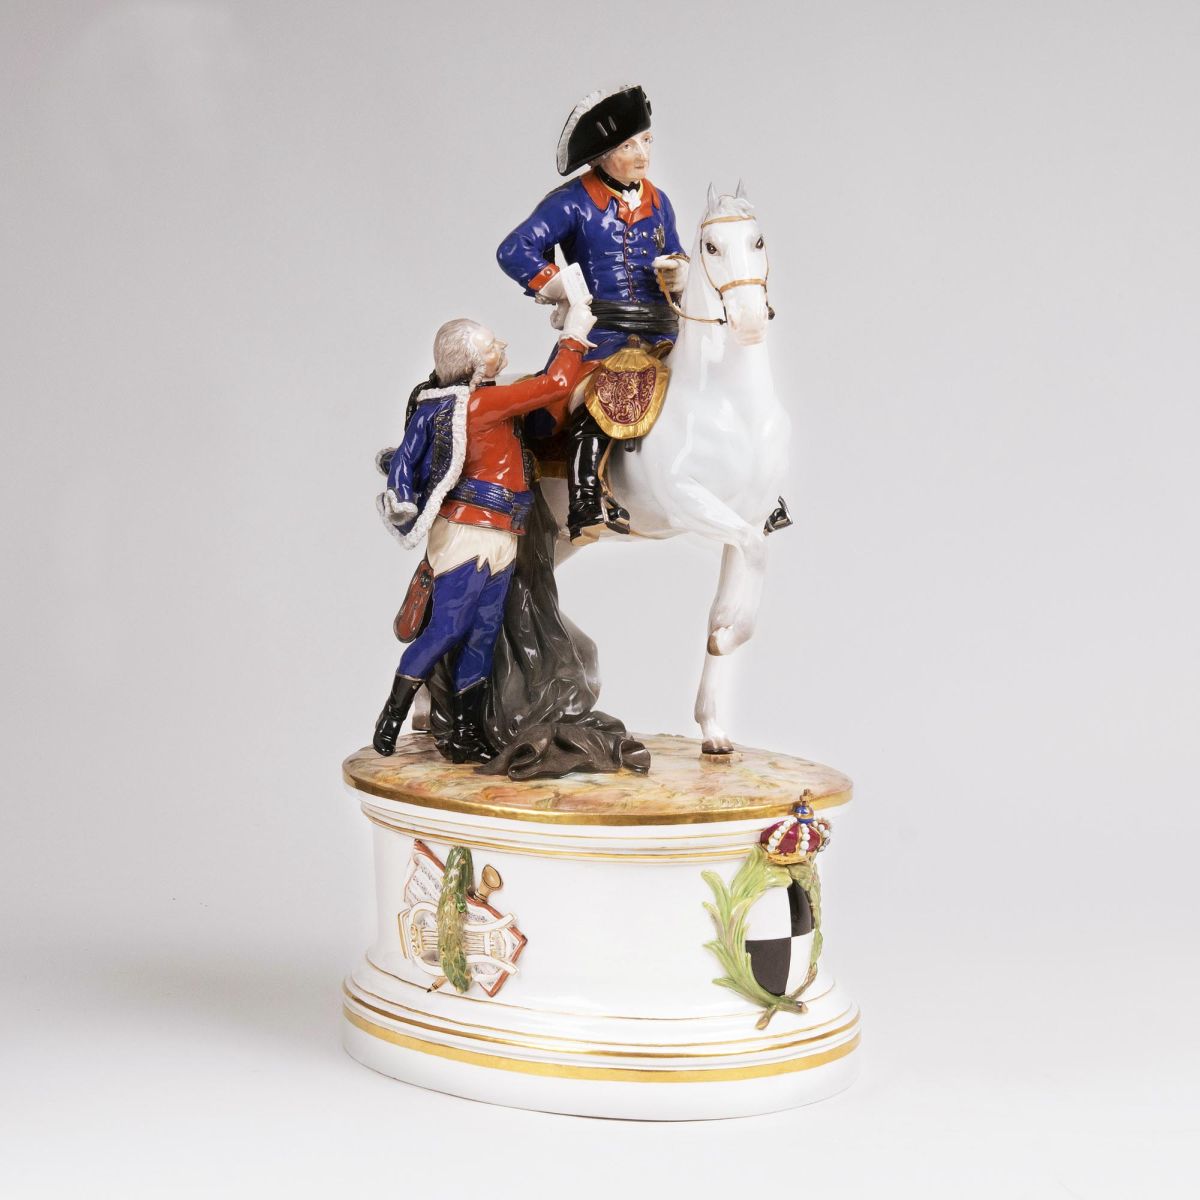 A Rare Large Figure Group 'Frederic the Great with General von Zieten'